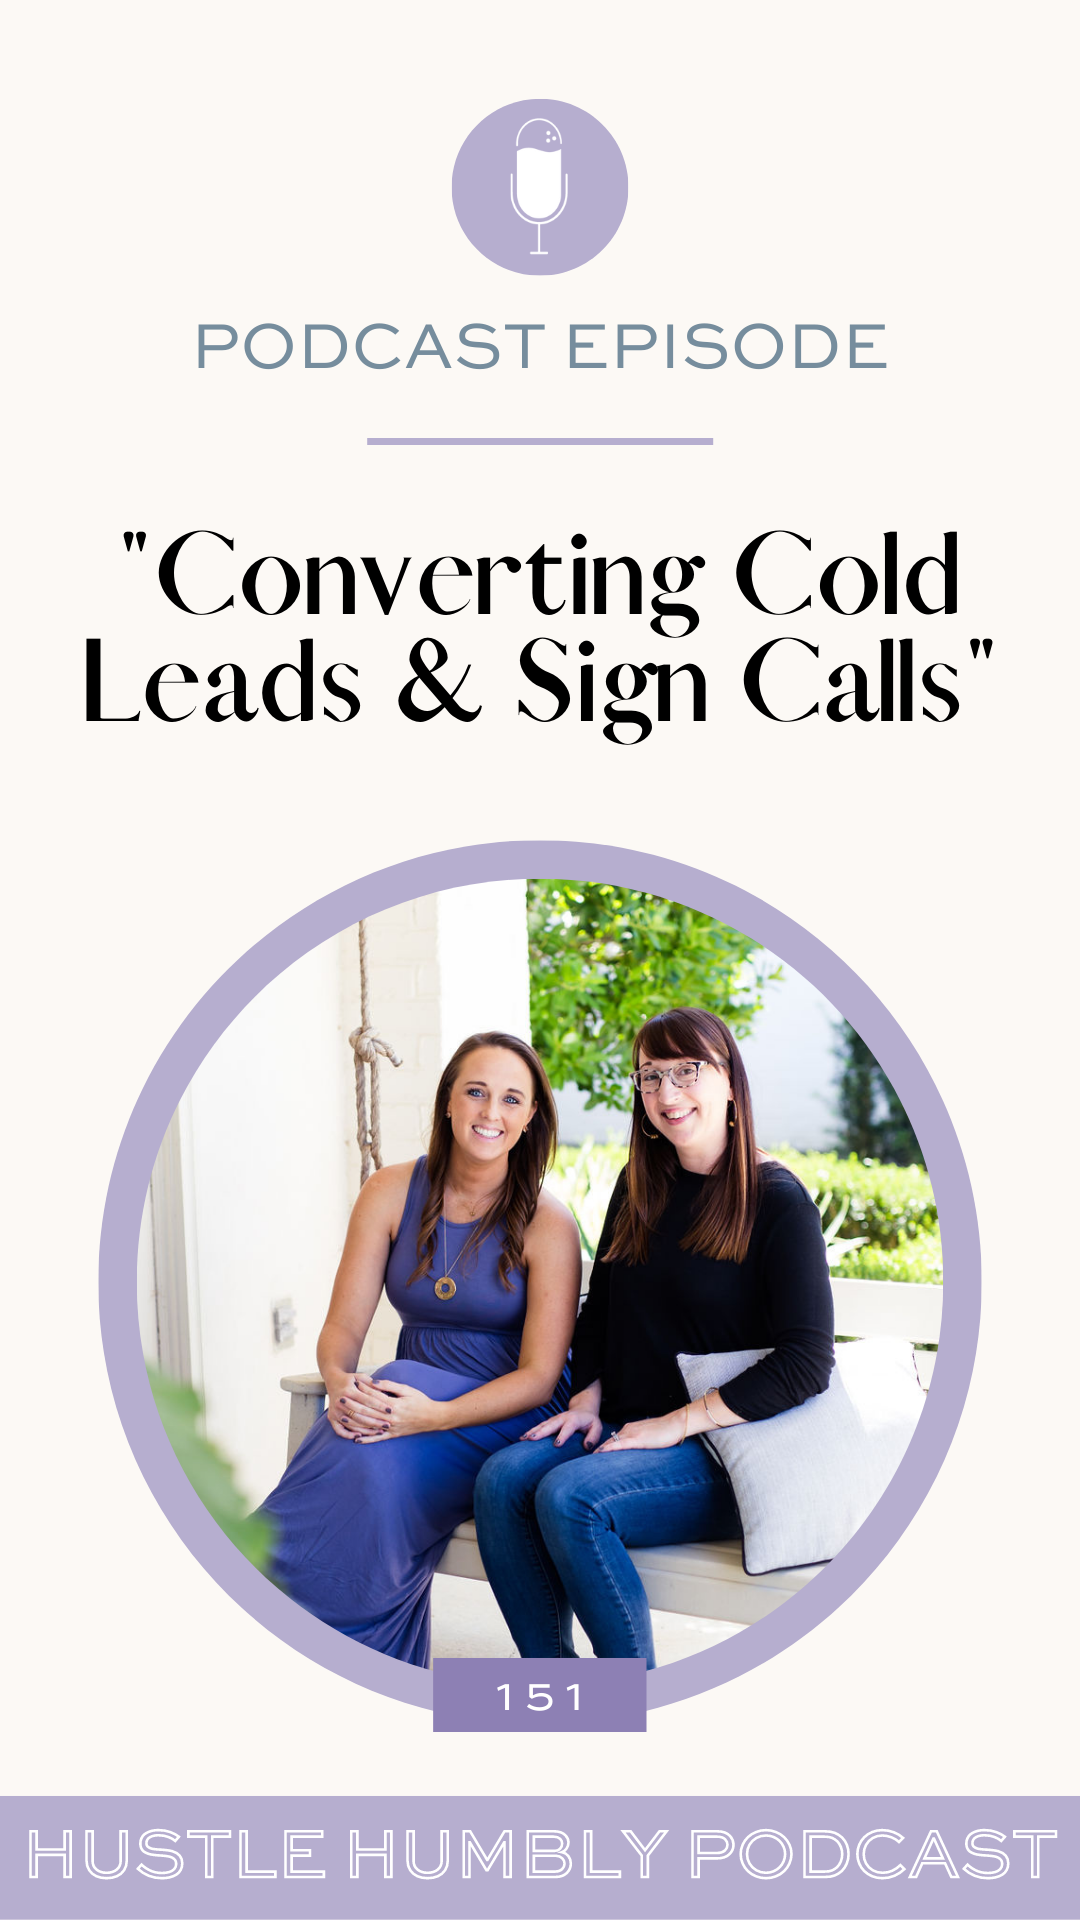 151: Converting Cold Leads & Sign Calls